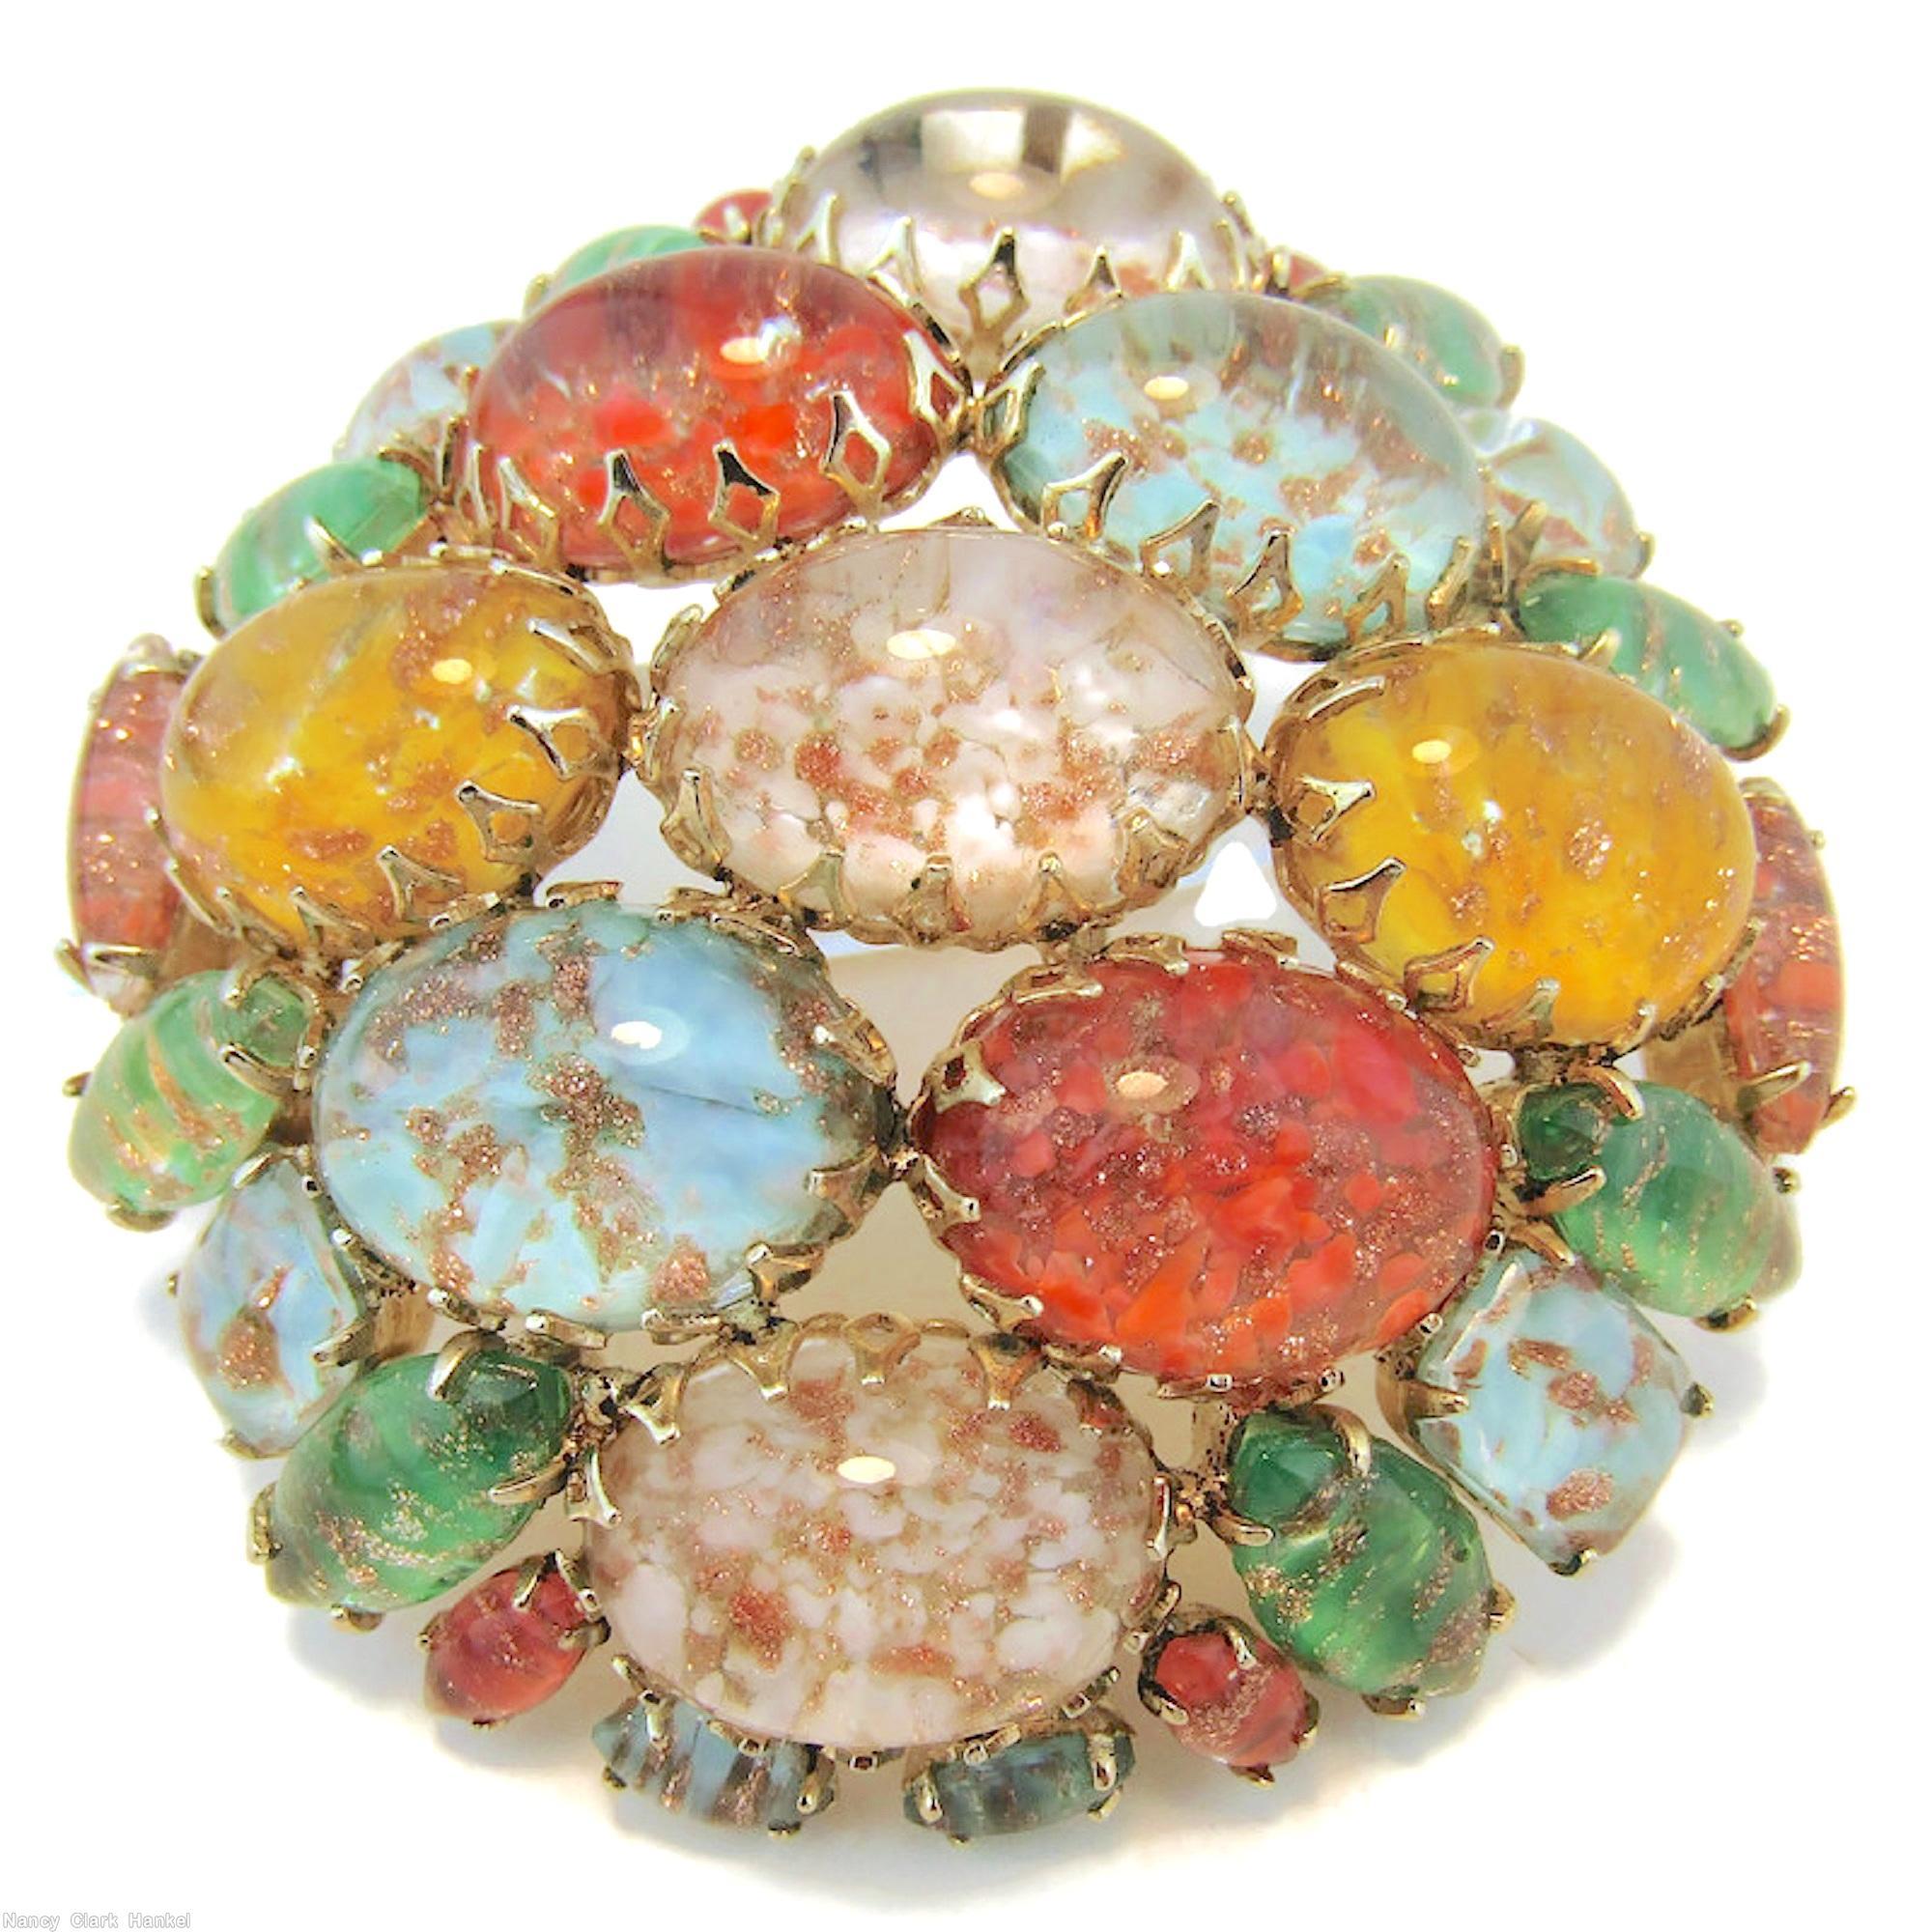 Schreiner domed round pin 9 large oval cab venetian red yellow blue green white jewelry